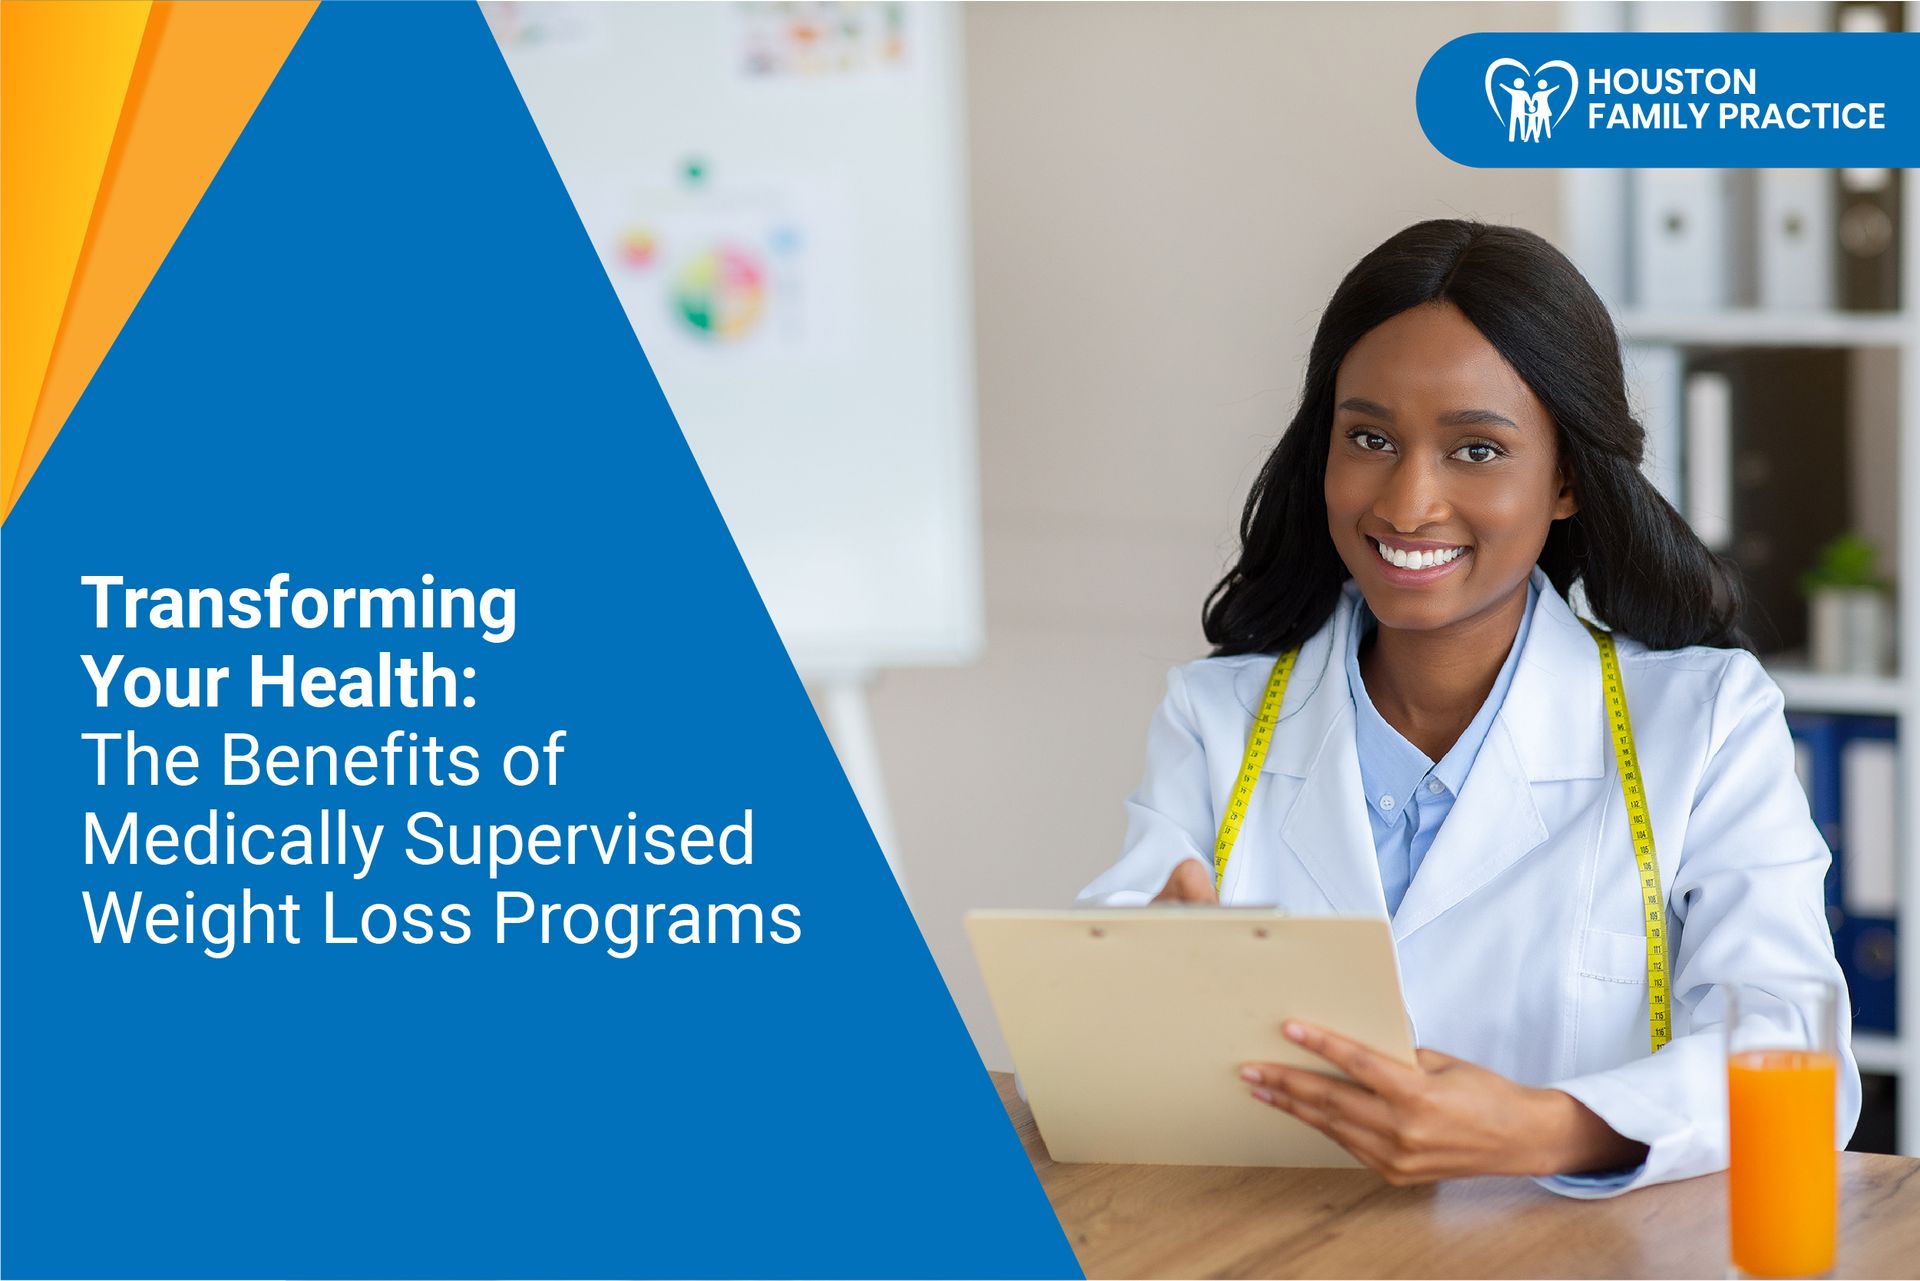 Transforming Your Health: The Benefits of Medically Supervised Weight Loss Programs